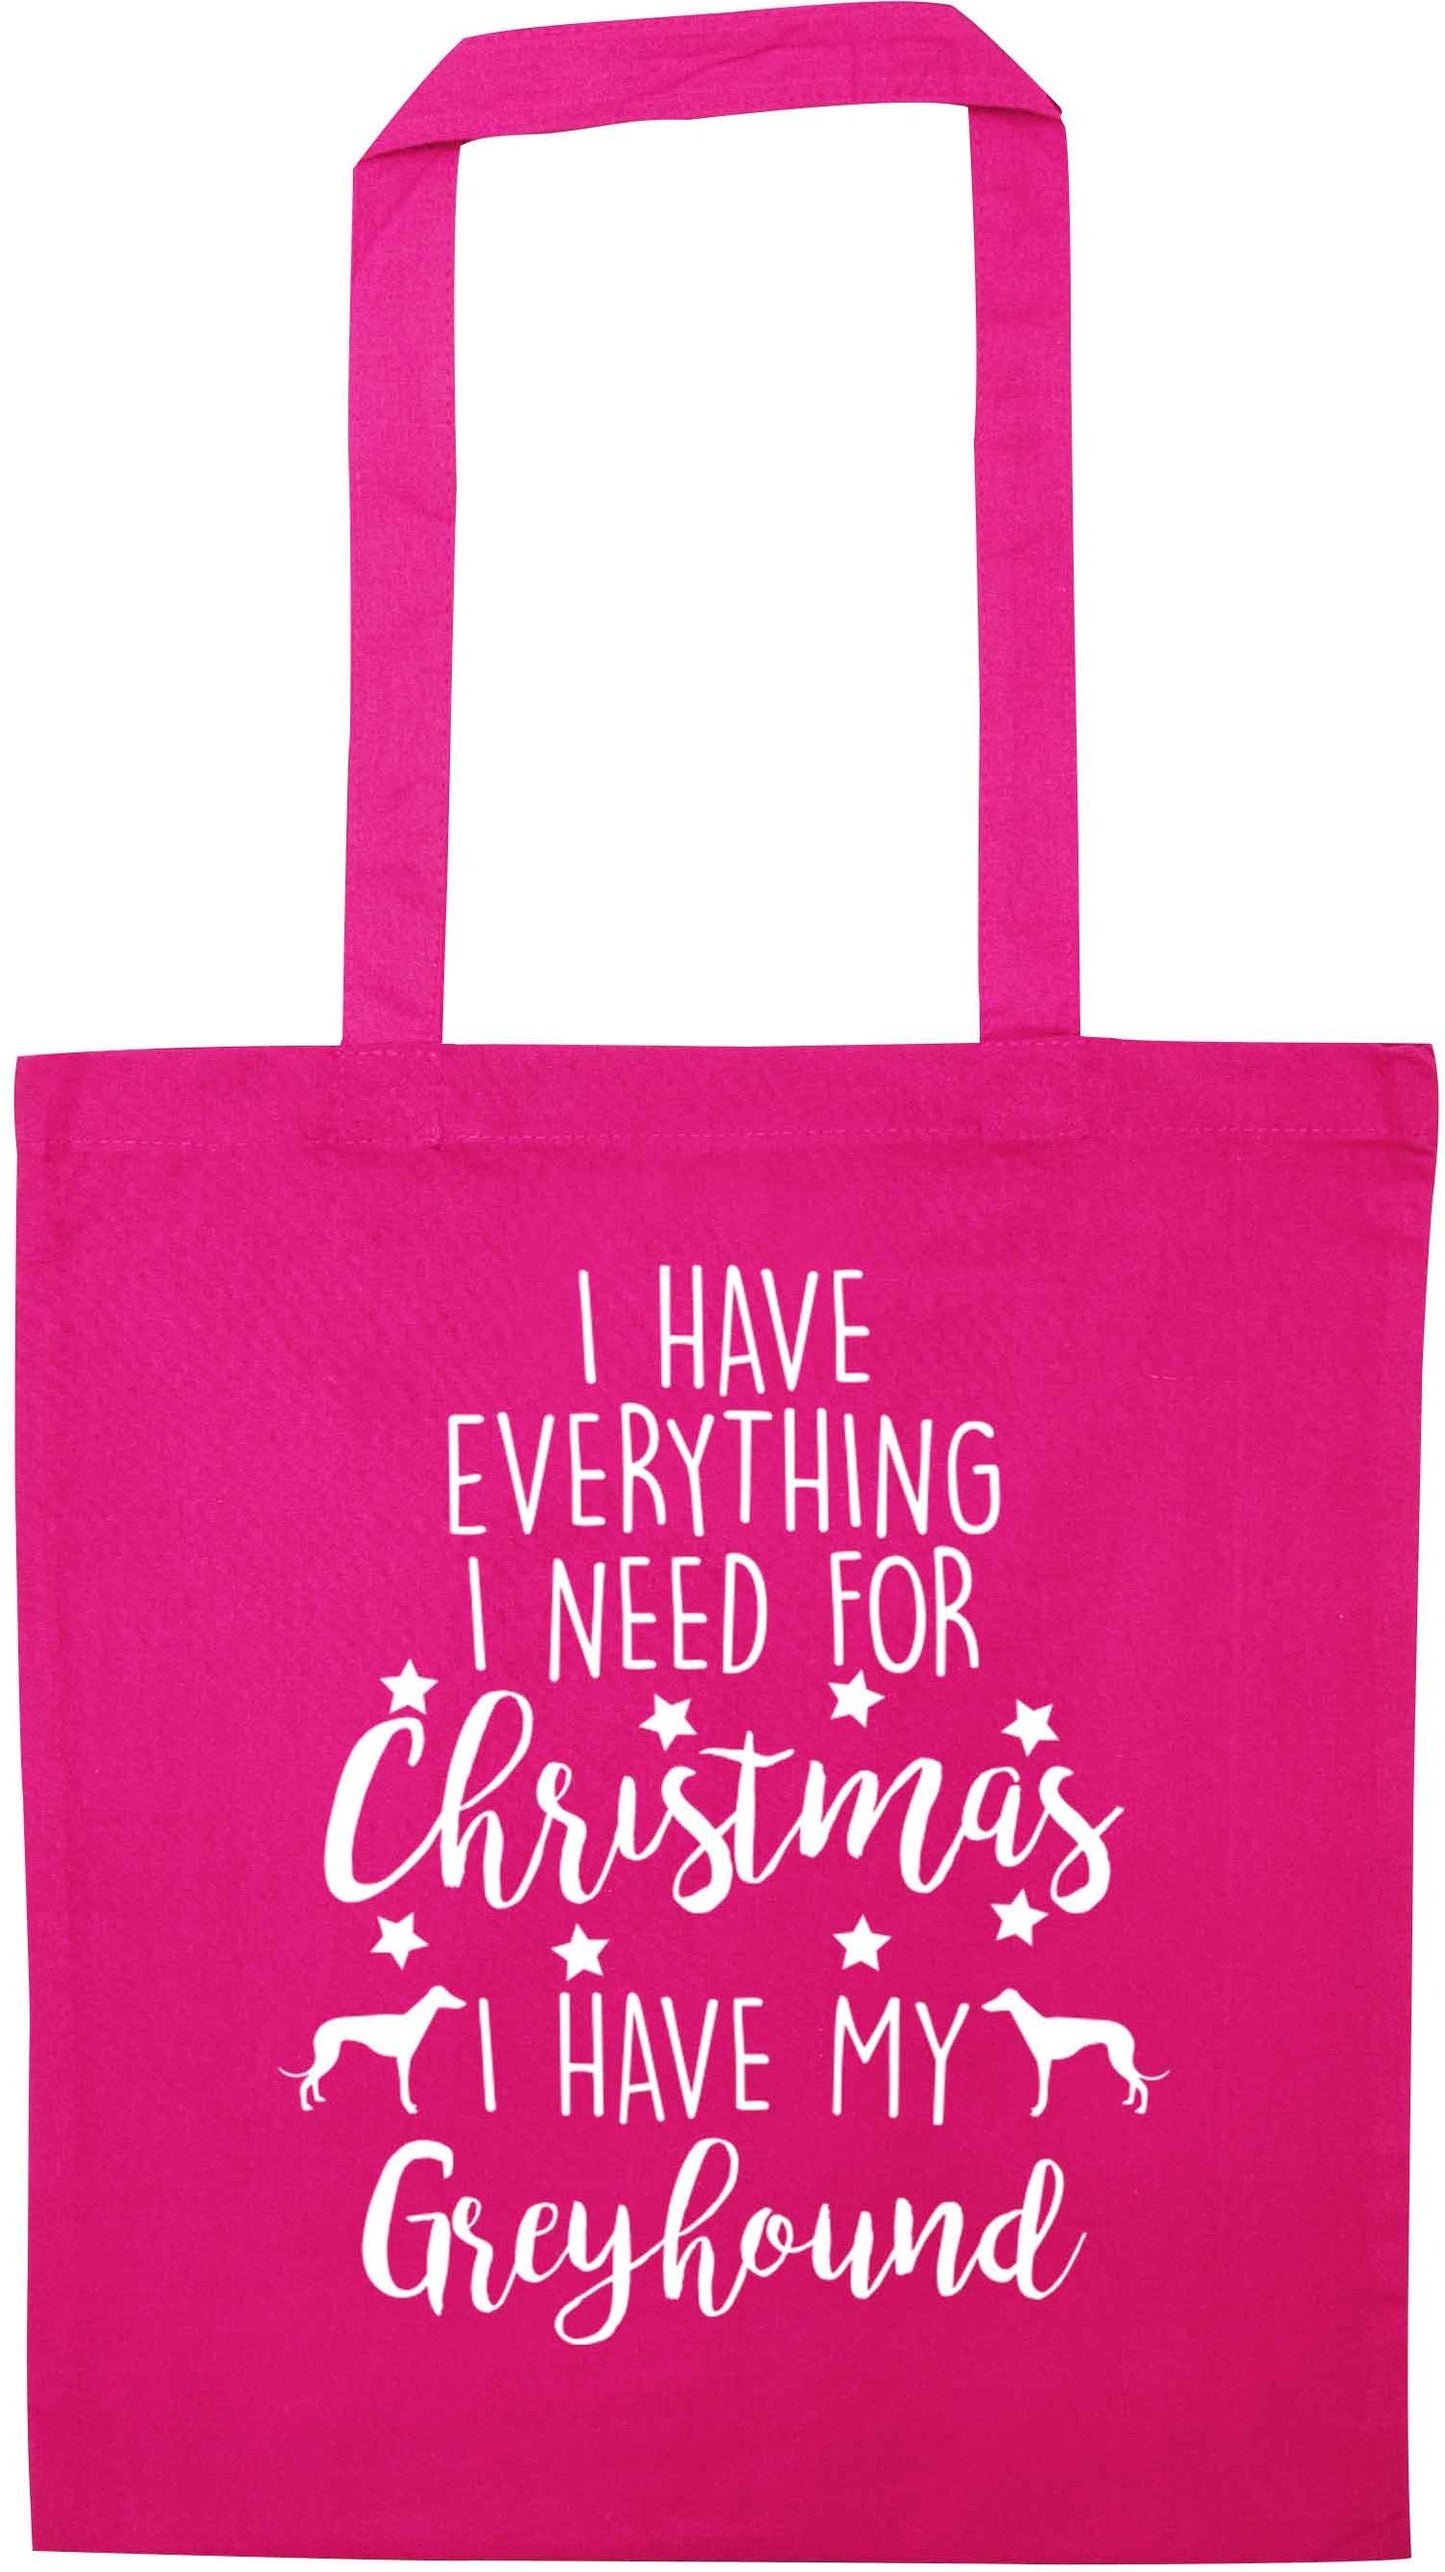 I have everything I need for Christmas I have my greyhound pink tote bag